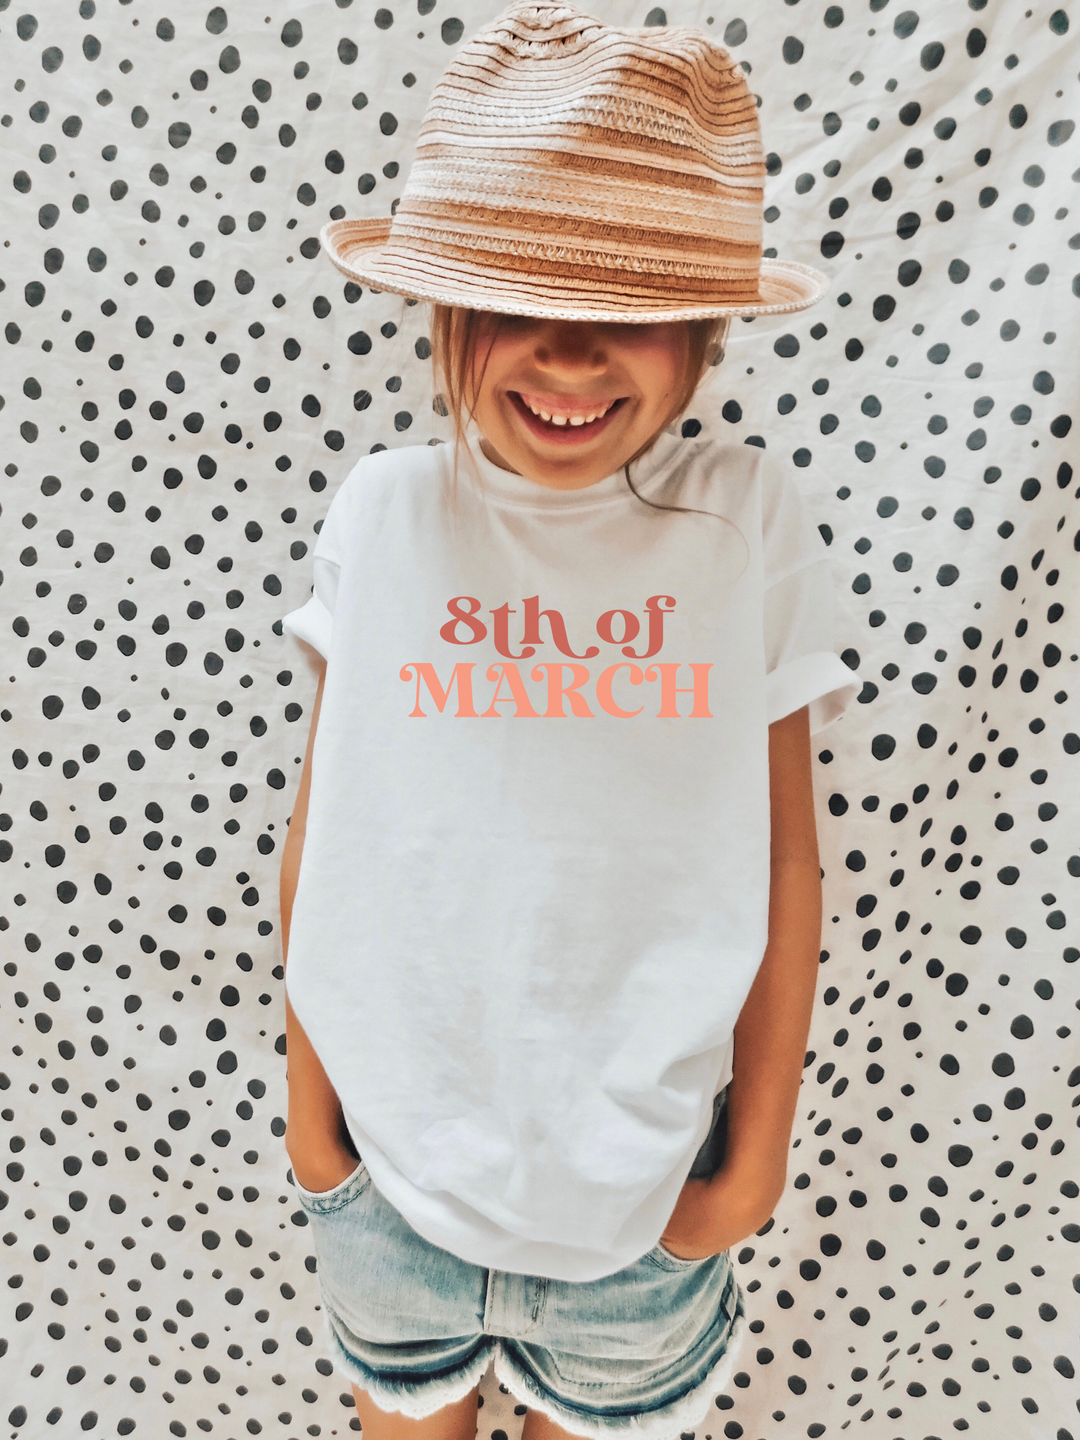 8th Of March. Girl power t-shirts for Toddlers and Kids.